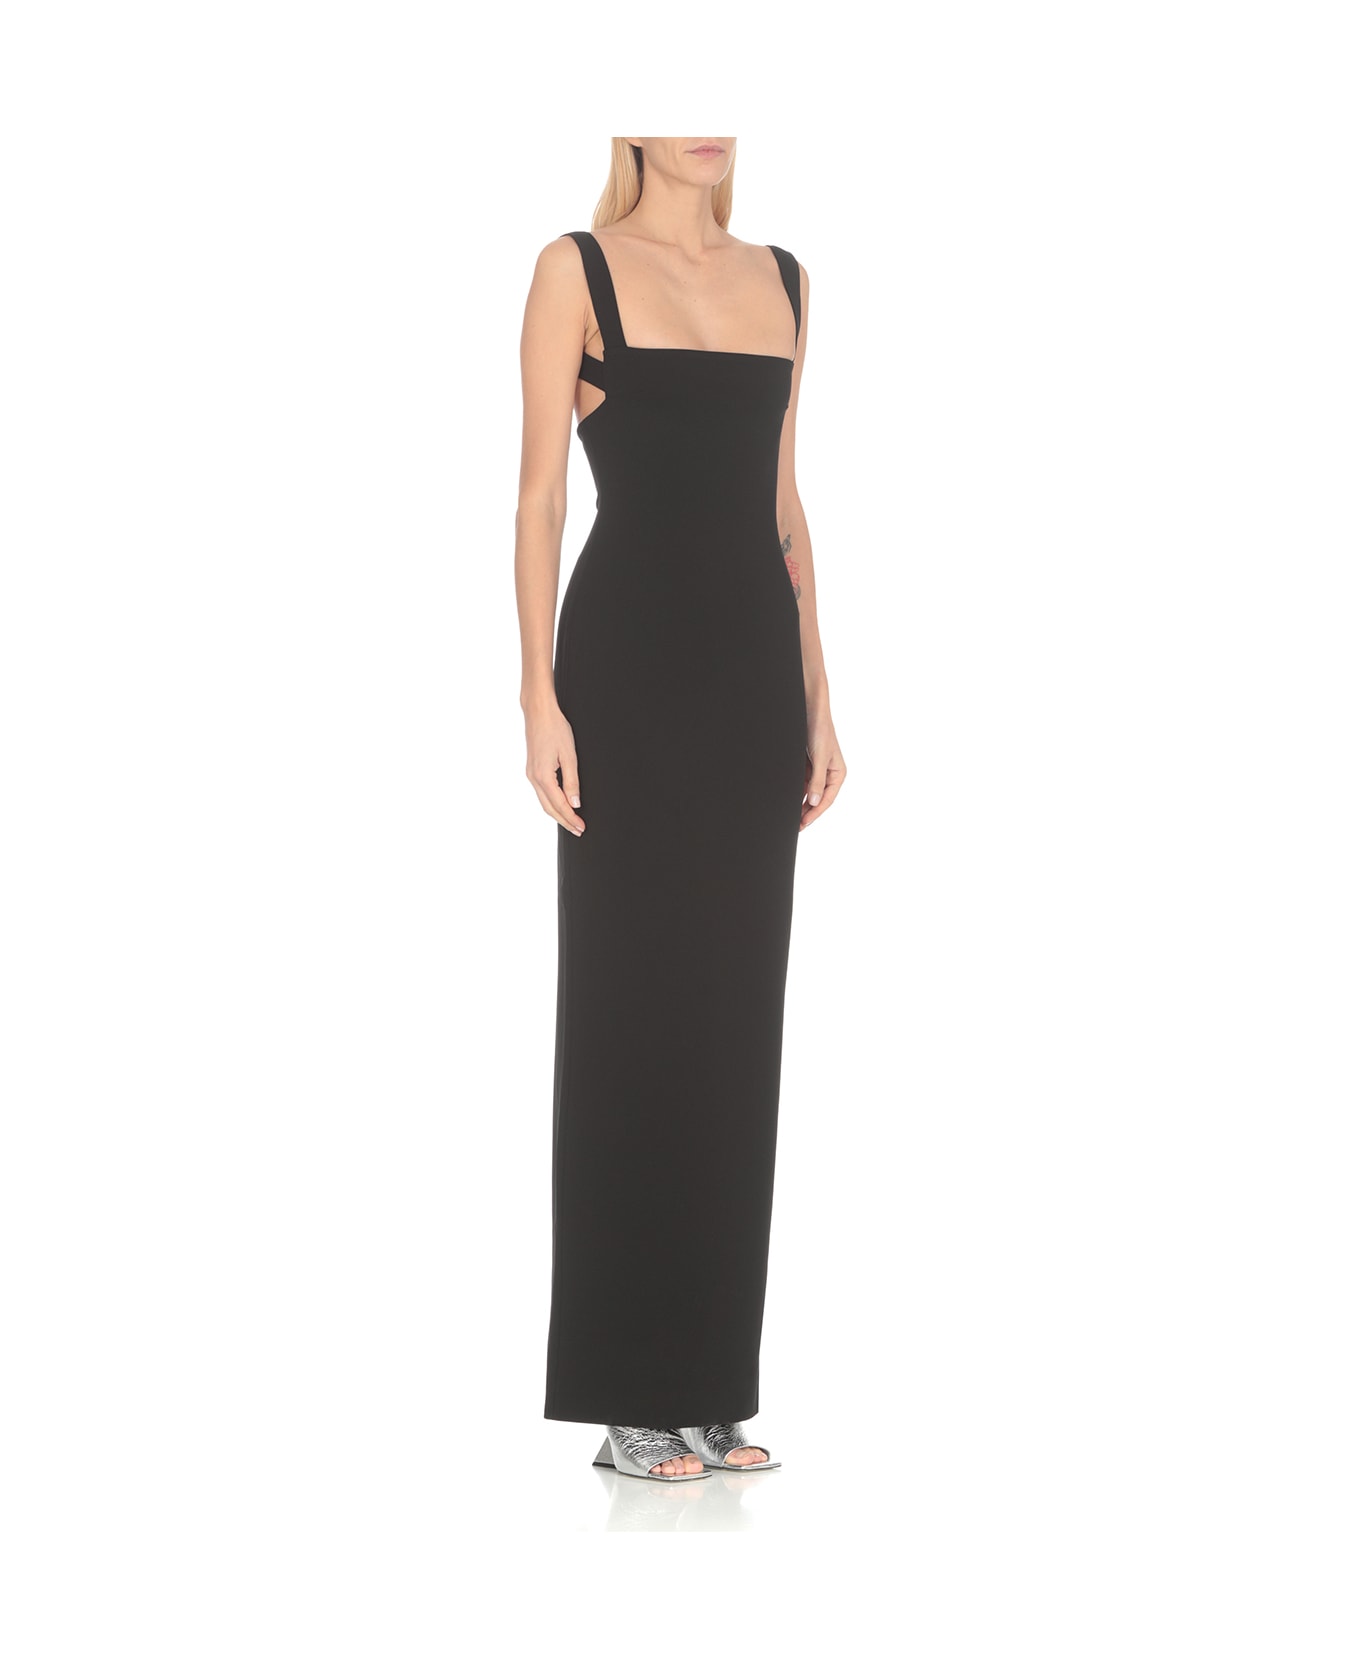 Solace London 'joni' Black Maxi Dress With Square Neck And Open Back Woman - Black